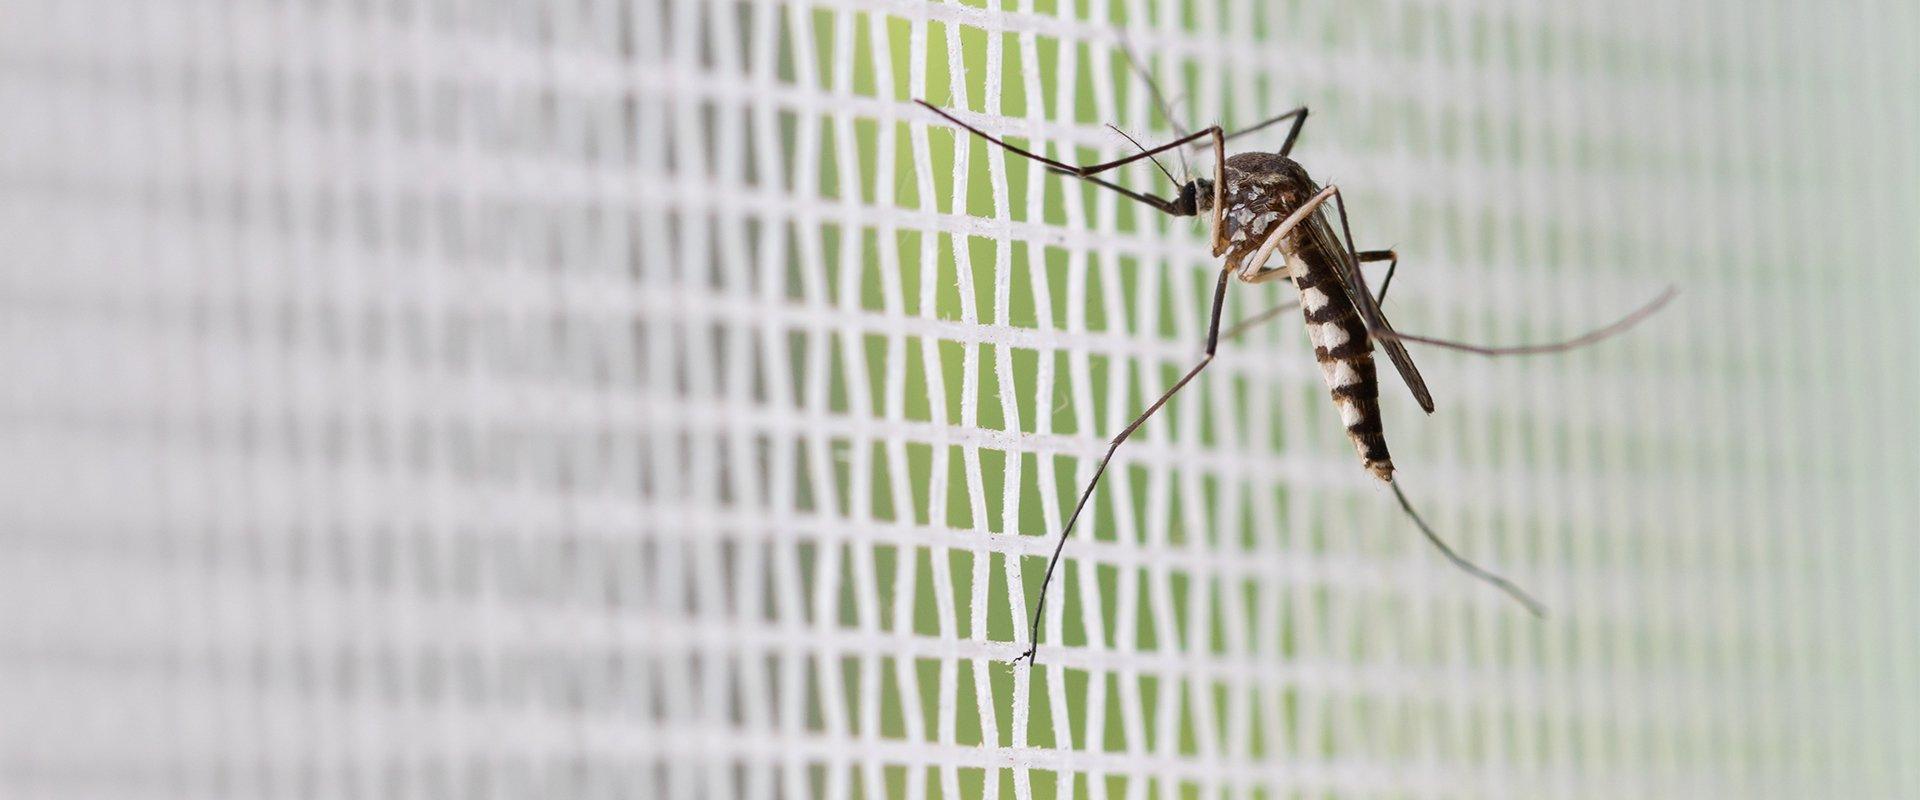 mosquito on a window screen